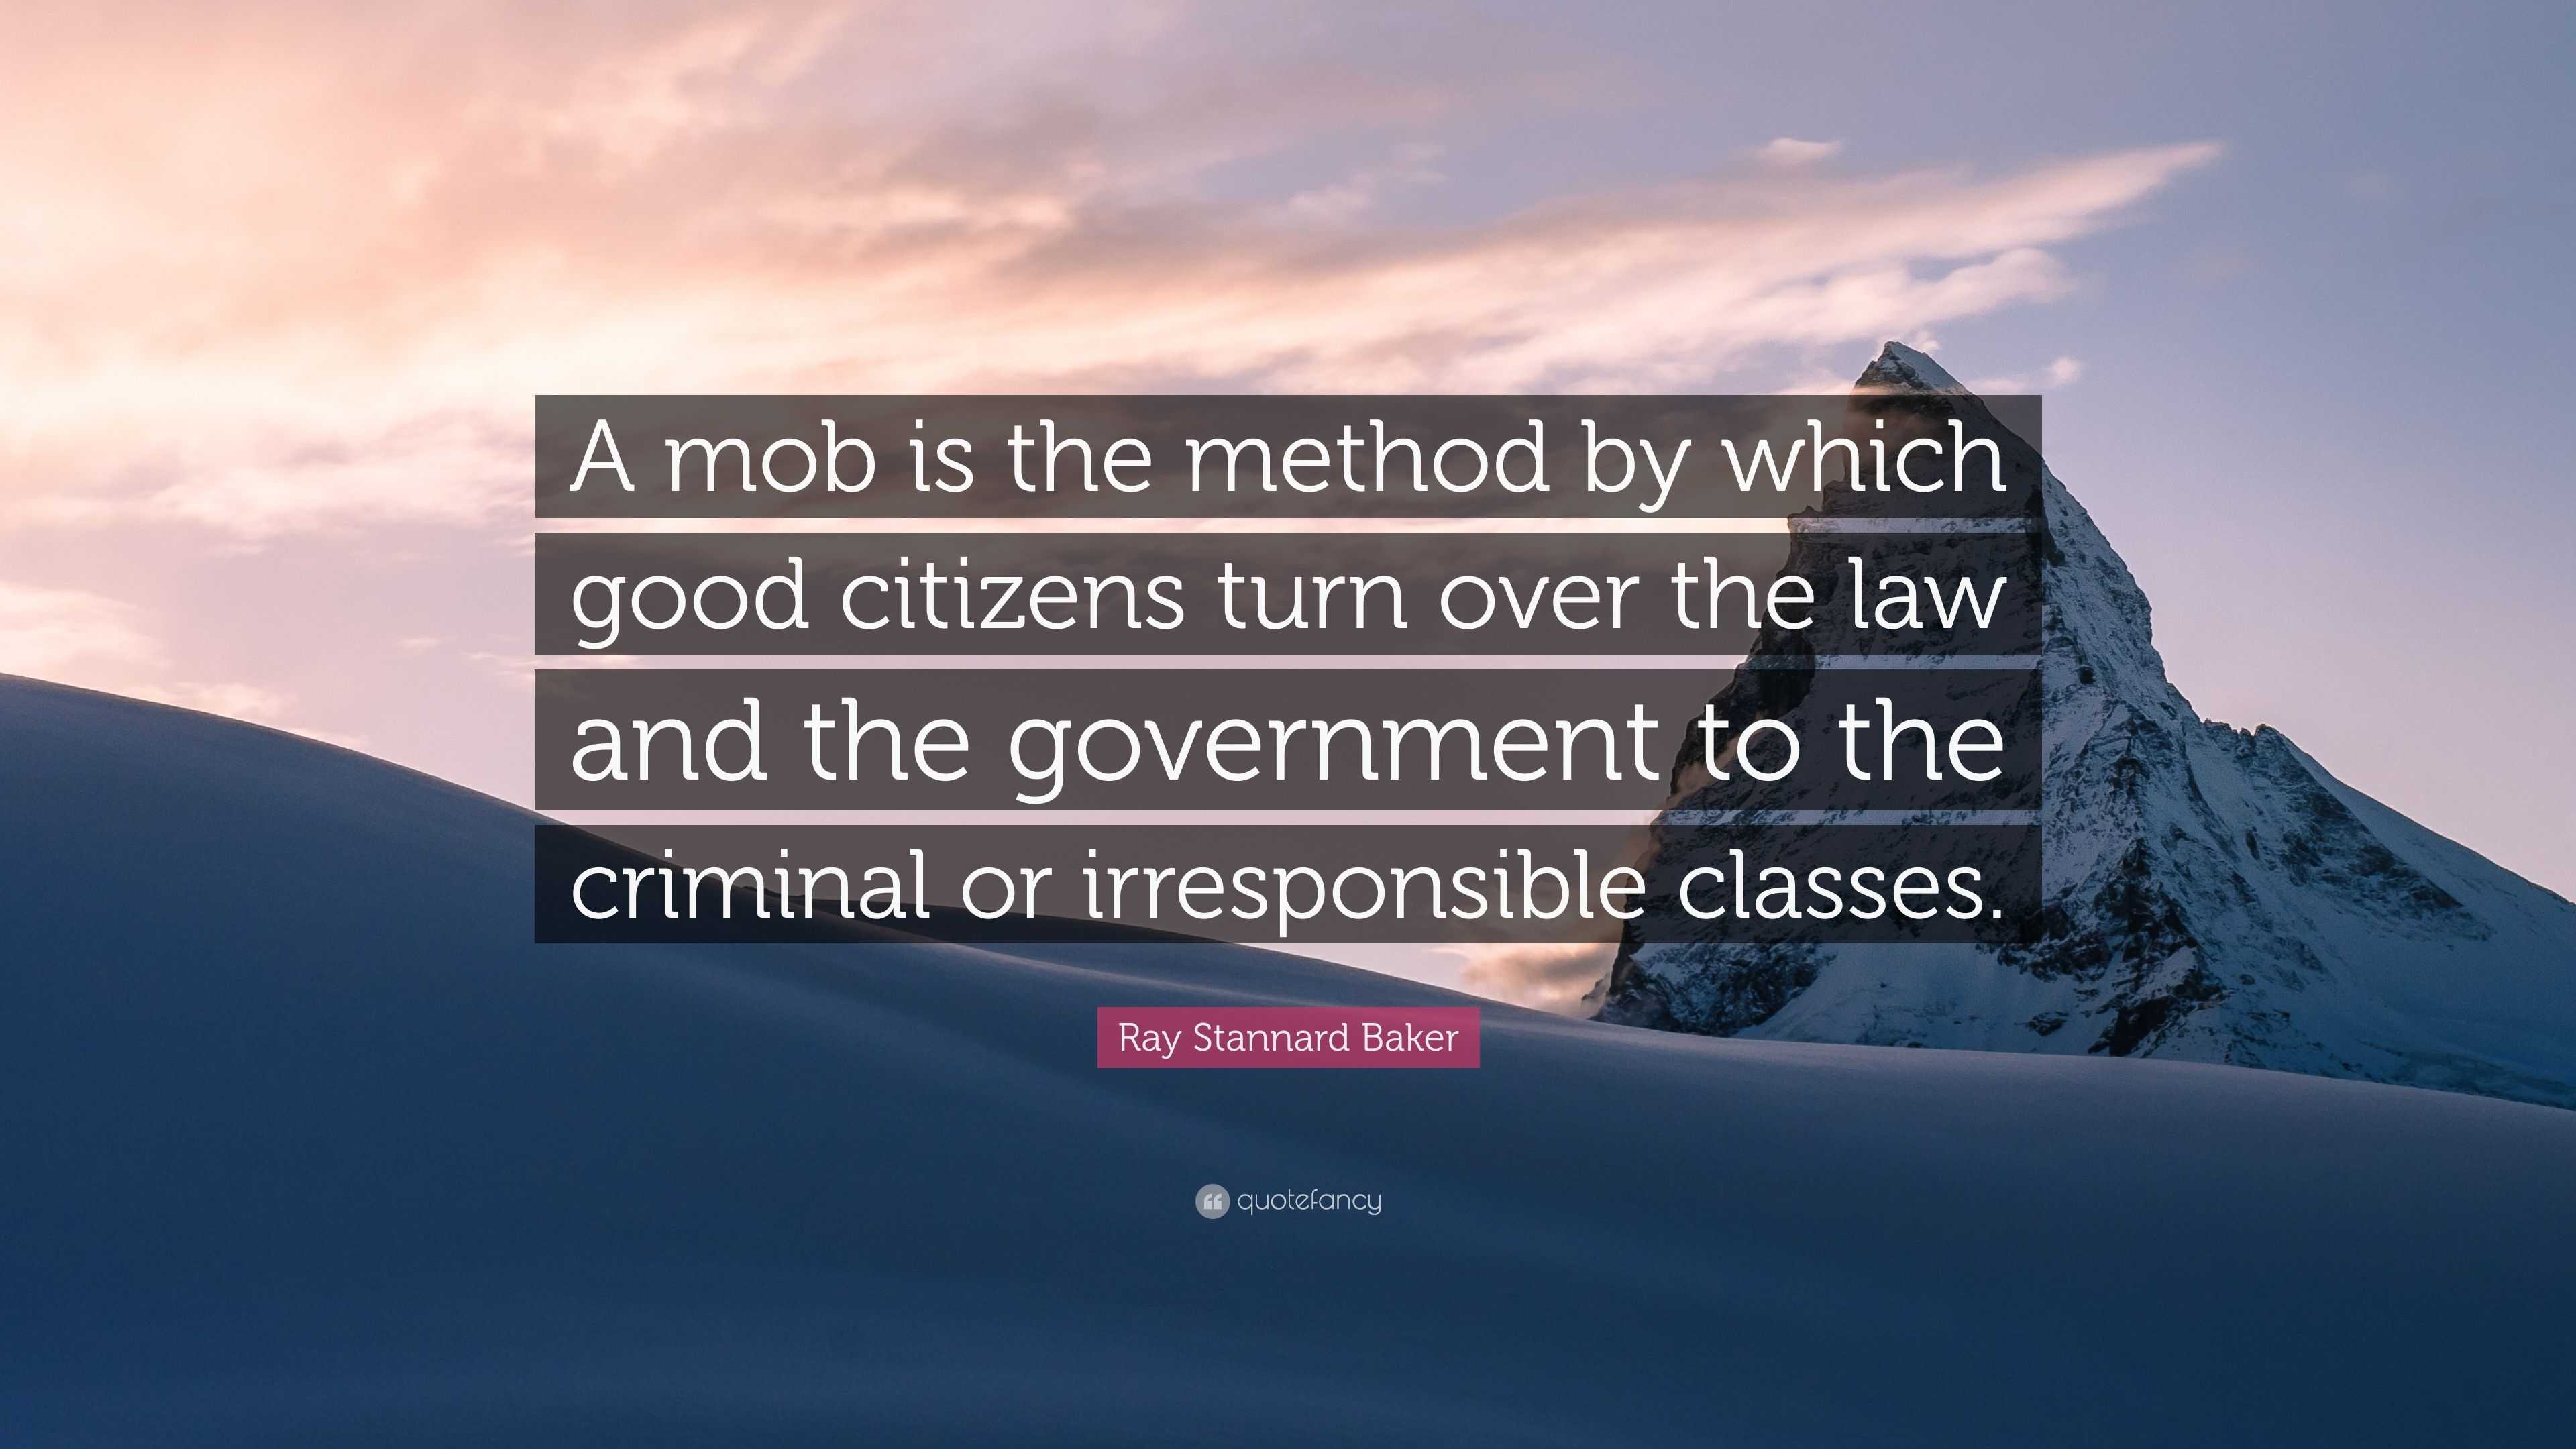 Ray Stannard Baker Quote: “A mob is the method by which good